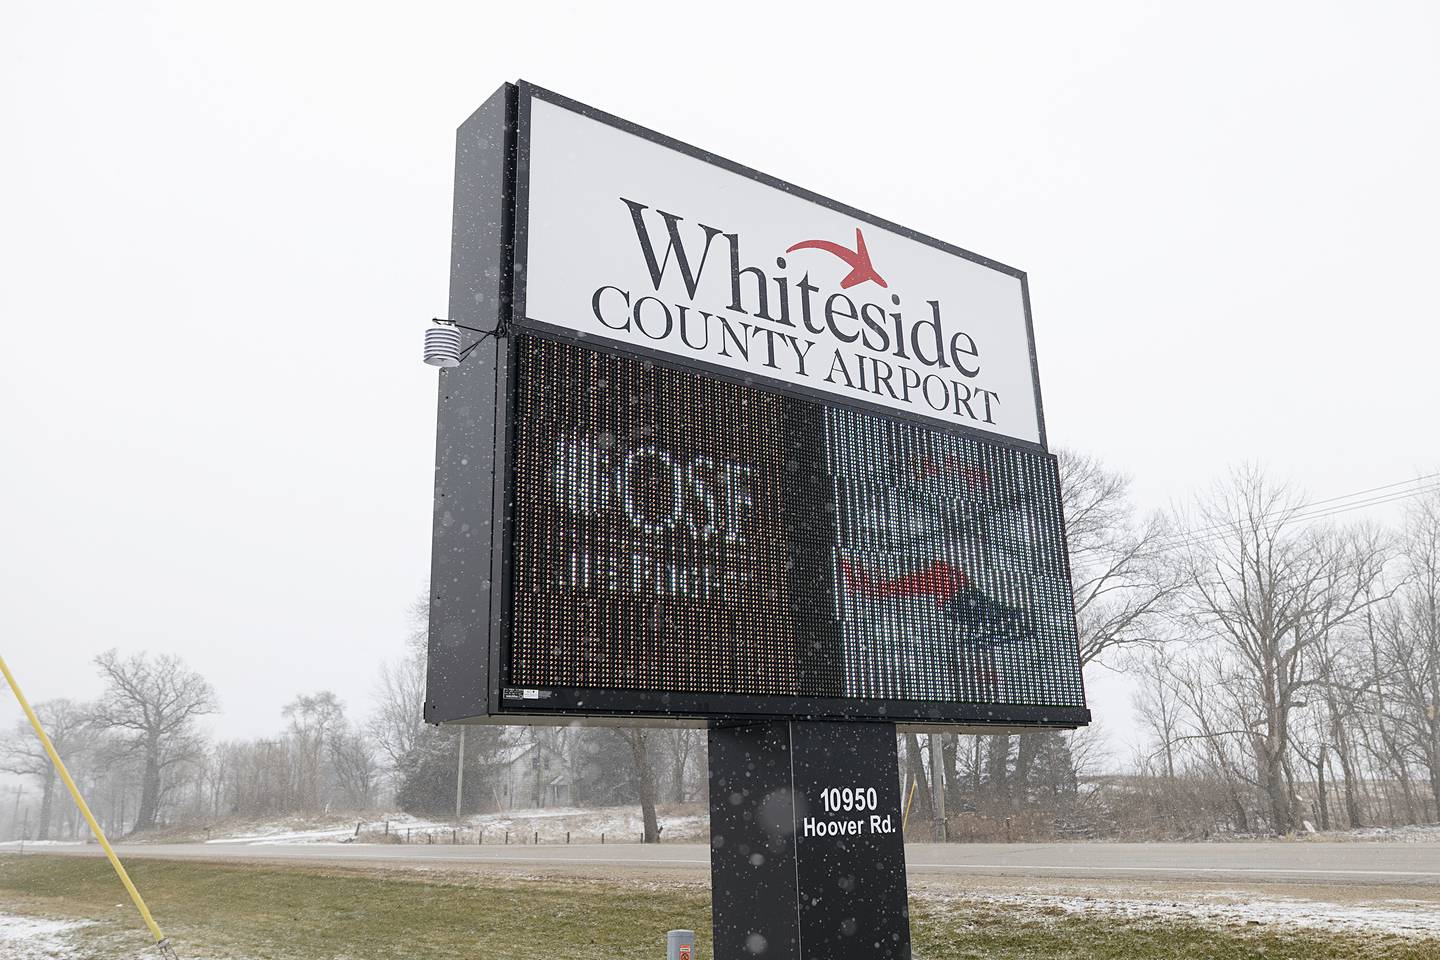 OSF Life Flight is expected to have a permanent hangar at the Whiteside County Airport.